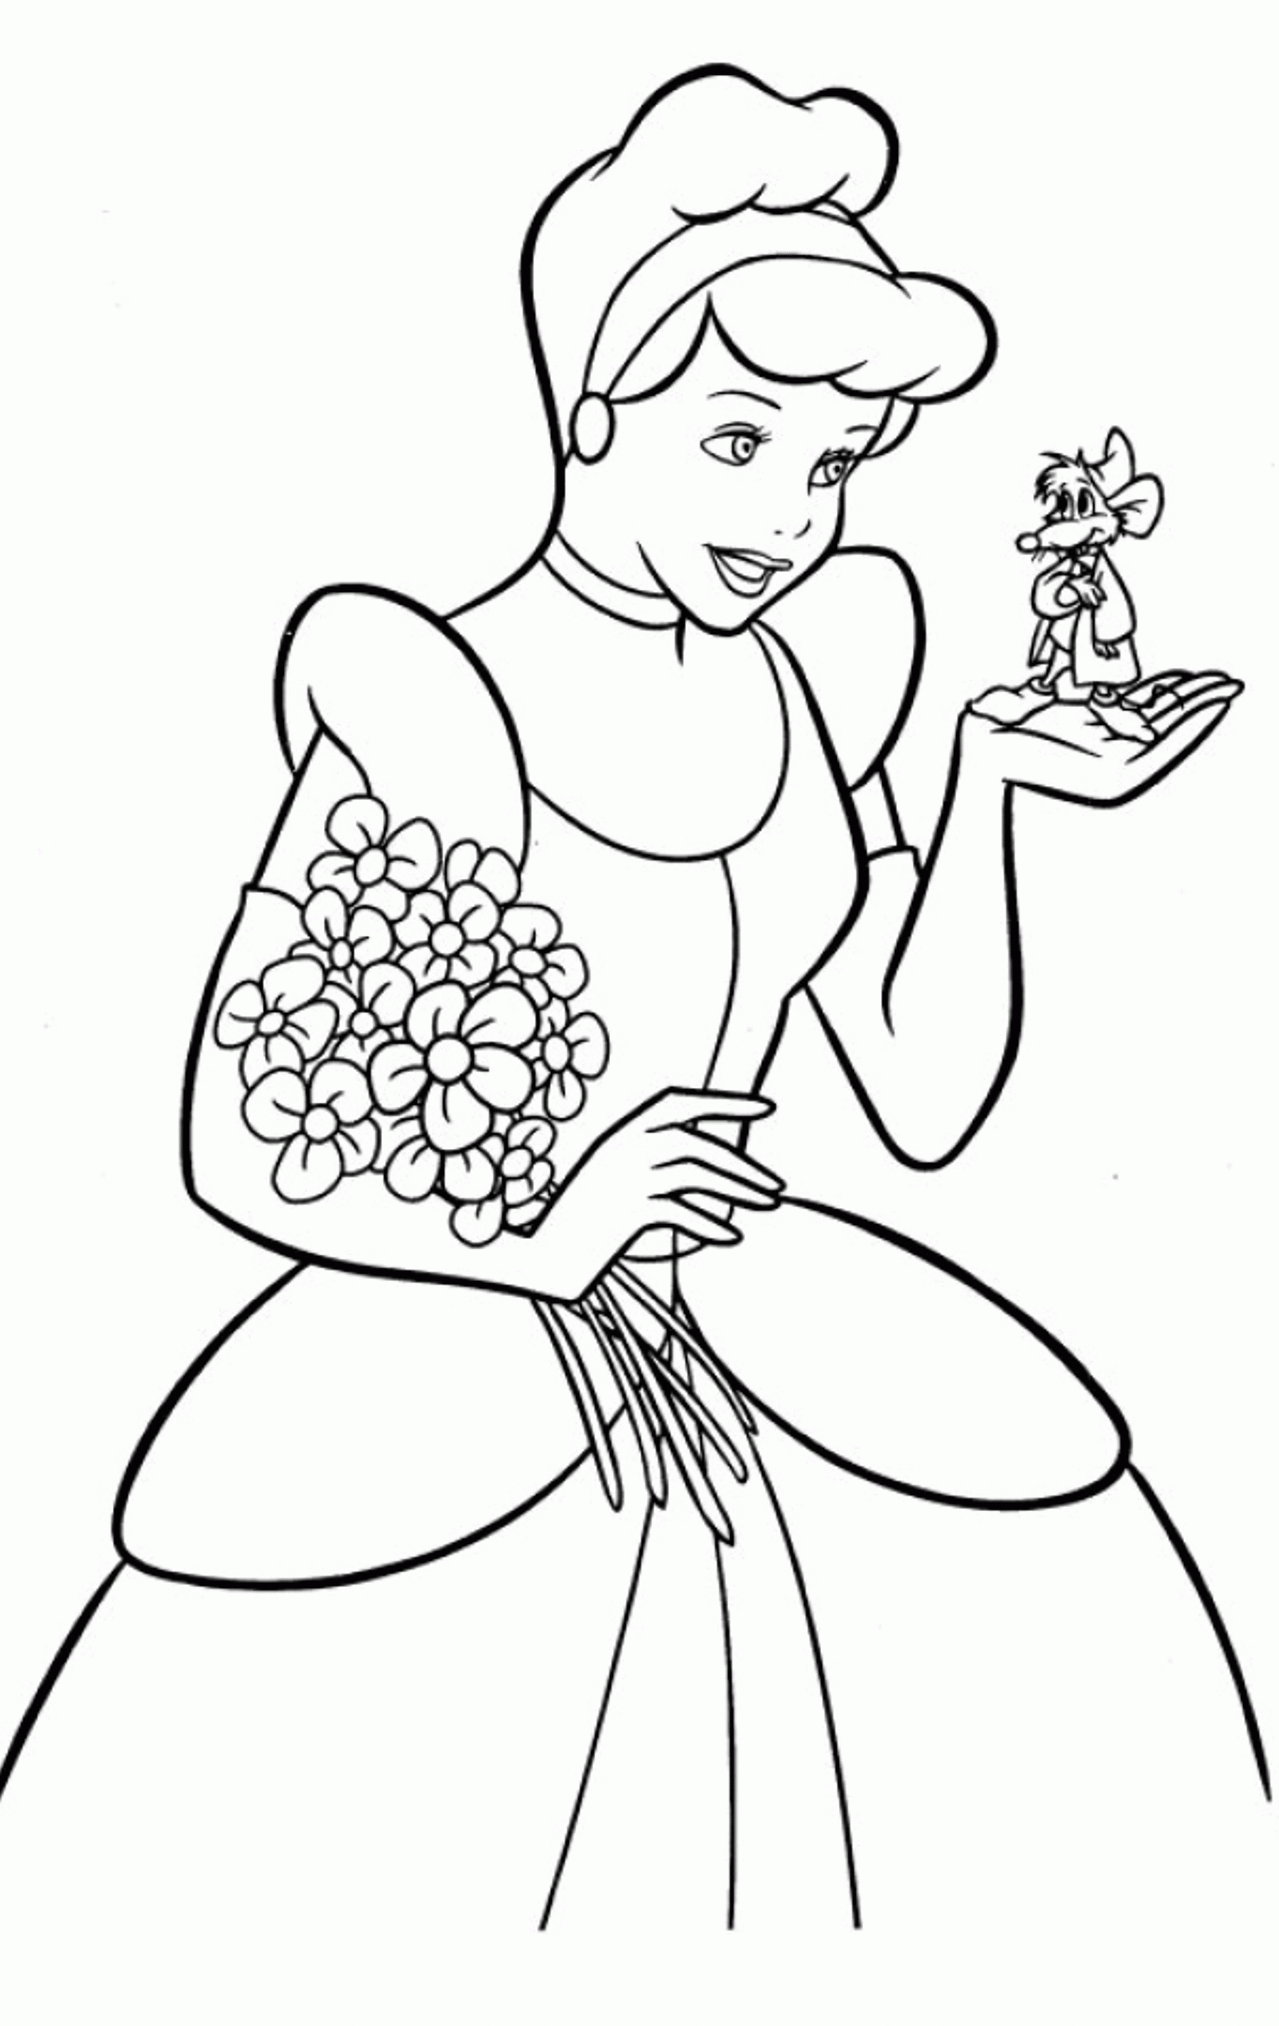 Free Cinderella Coloring Pages For Kids | Cartoon Coloring pages ...